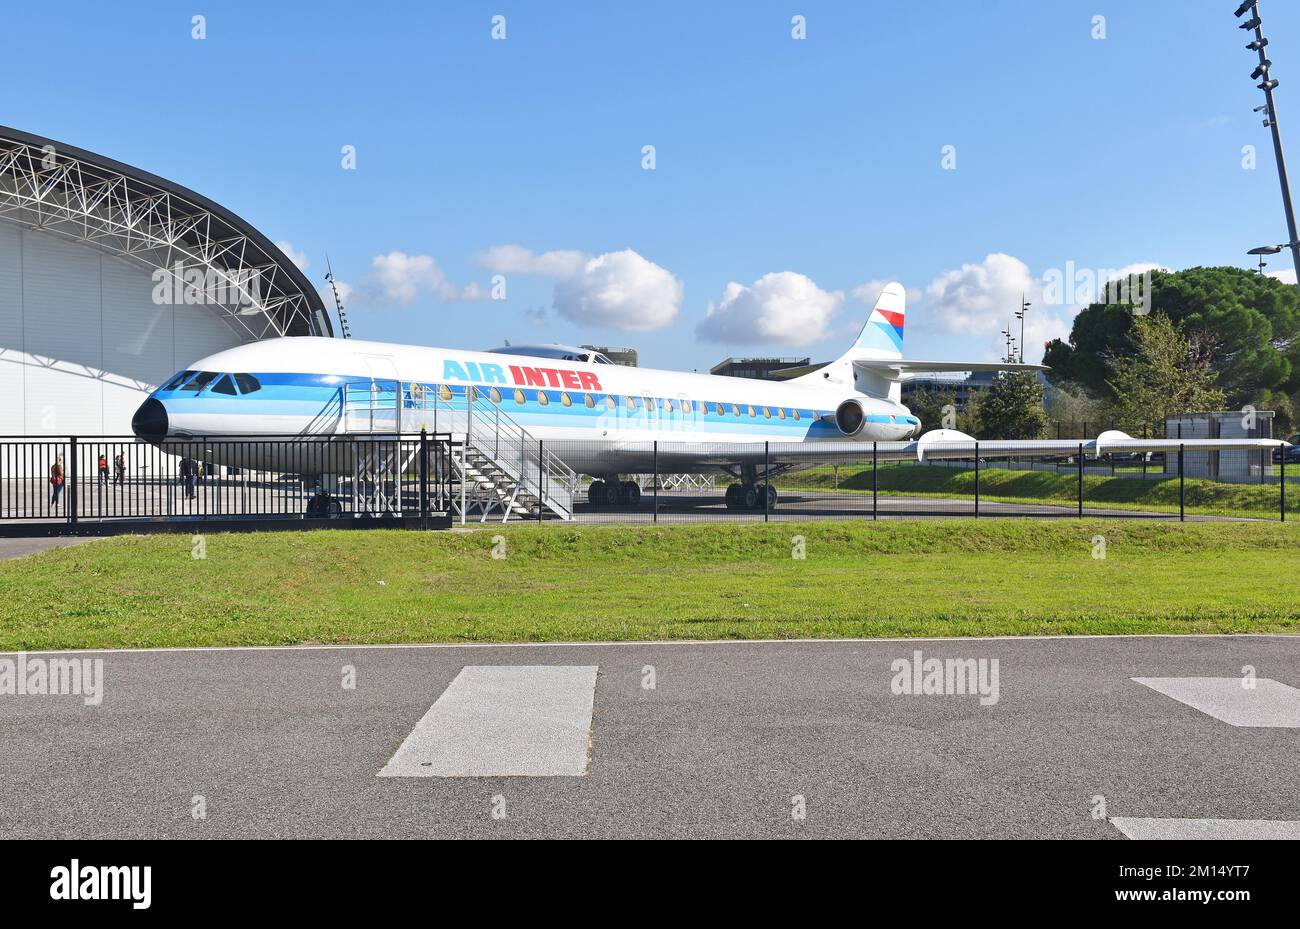 Toulouse France, Aeroscopia, aerospace museum, Blagnac, French home of Concorde, hangar-like building with short range Air inter Caravelle aircraft Stock Photo